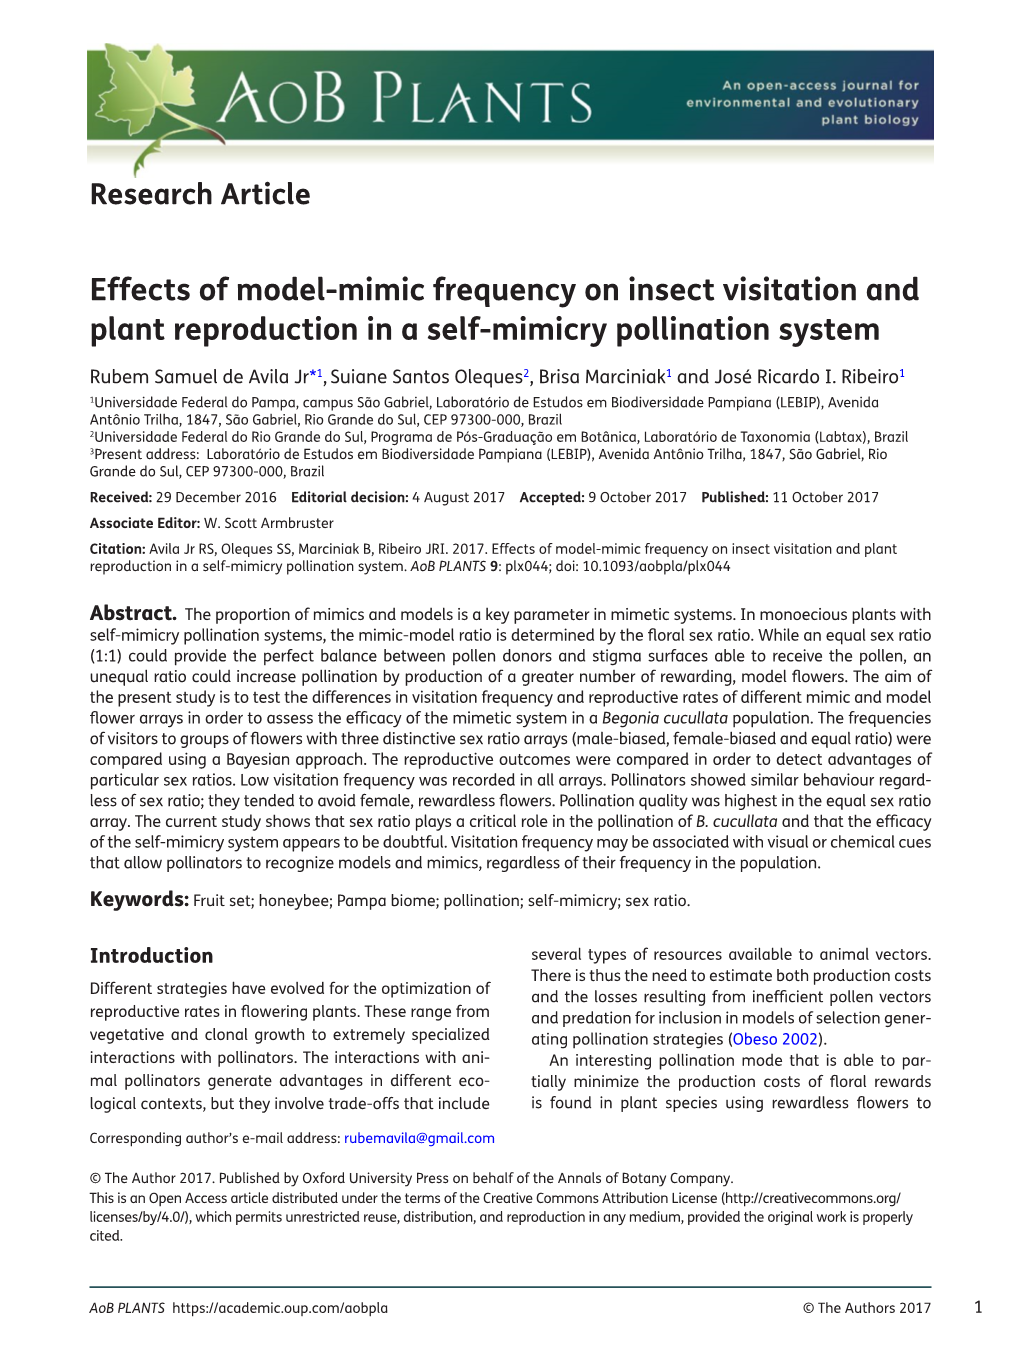 Effects of Model-Mimic Frequency on Insect Visitation and Plant Reproduction in a Self-Mimicry Pollination System